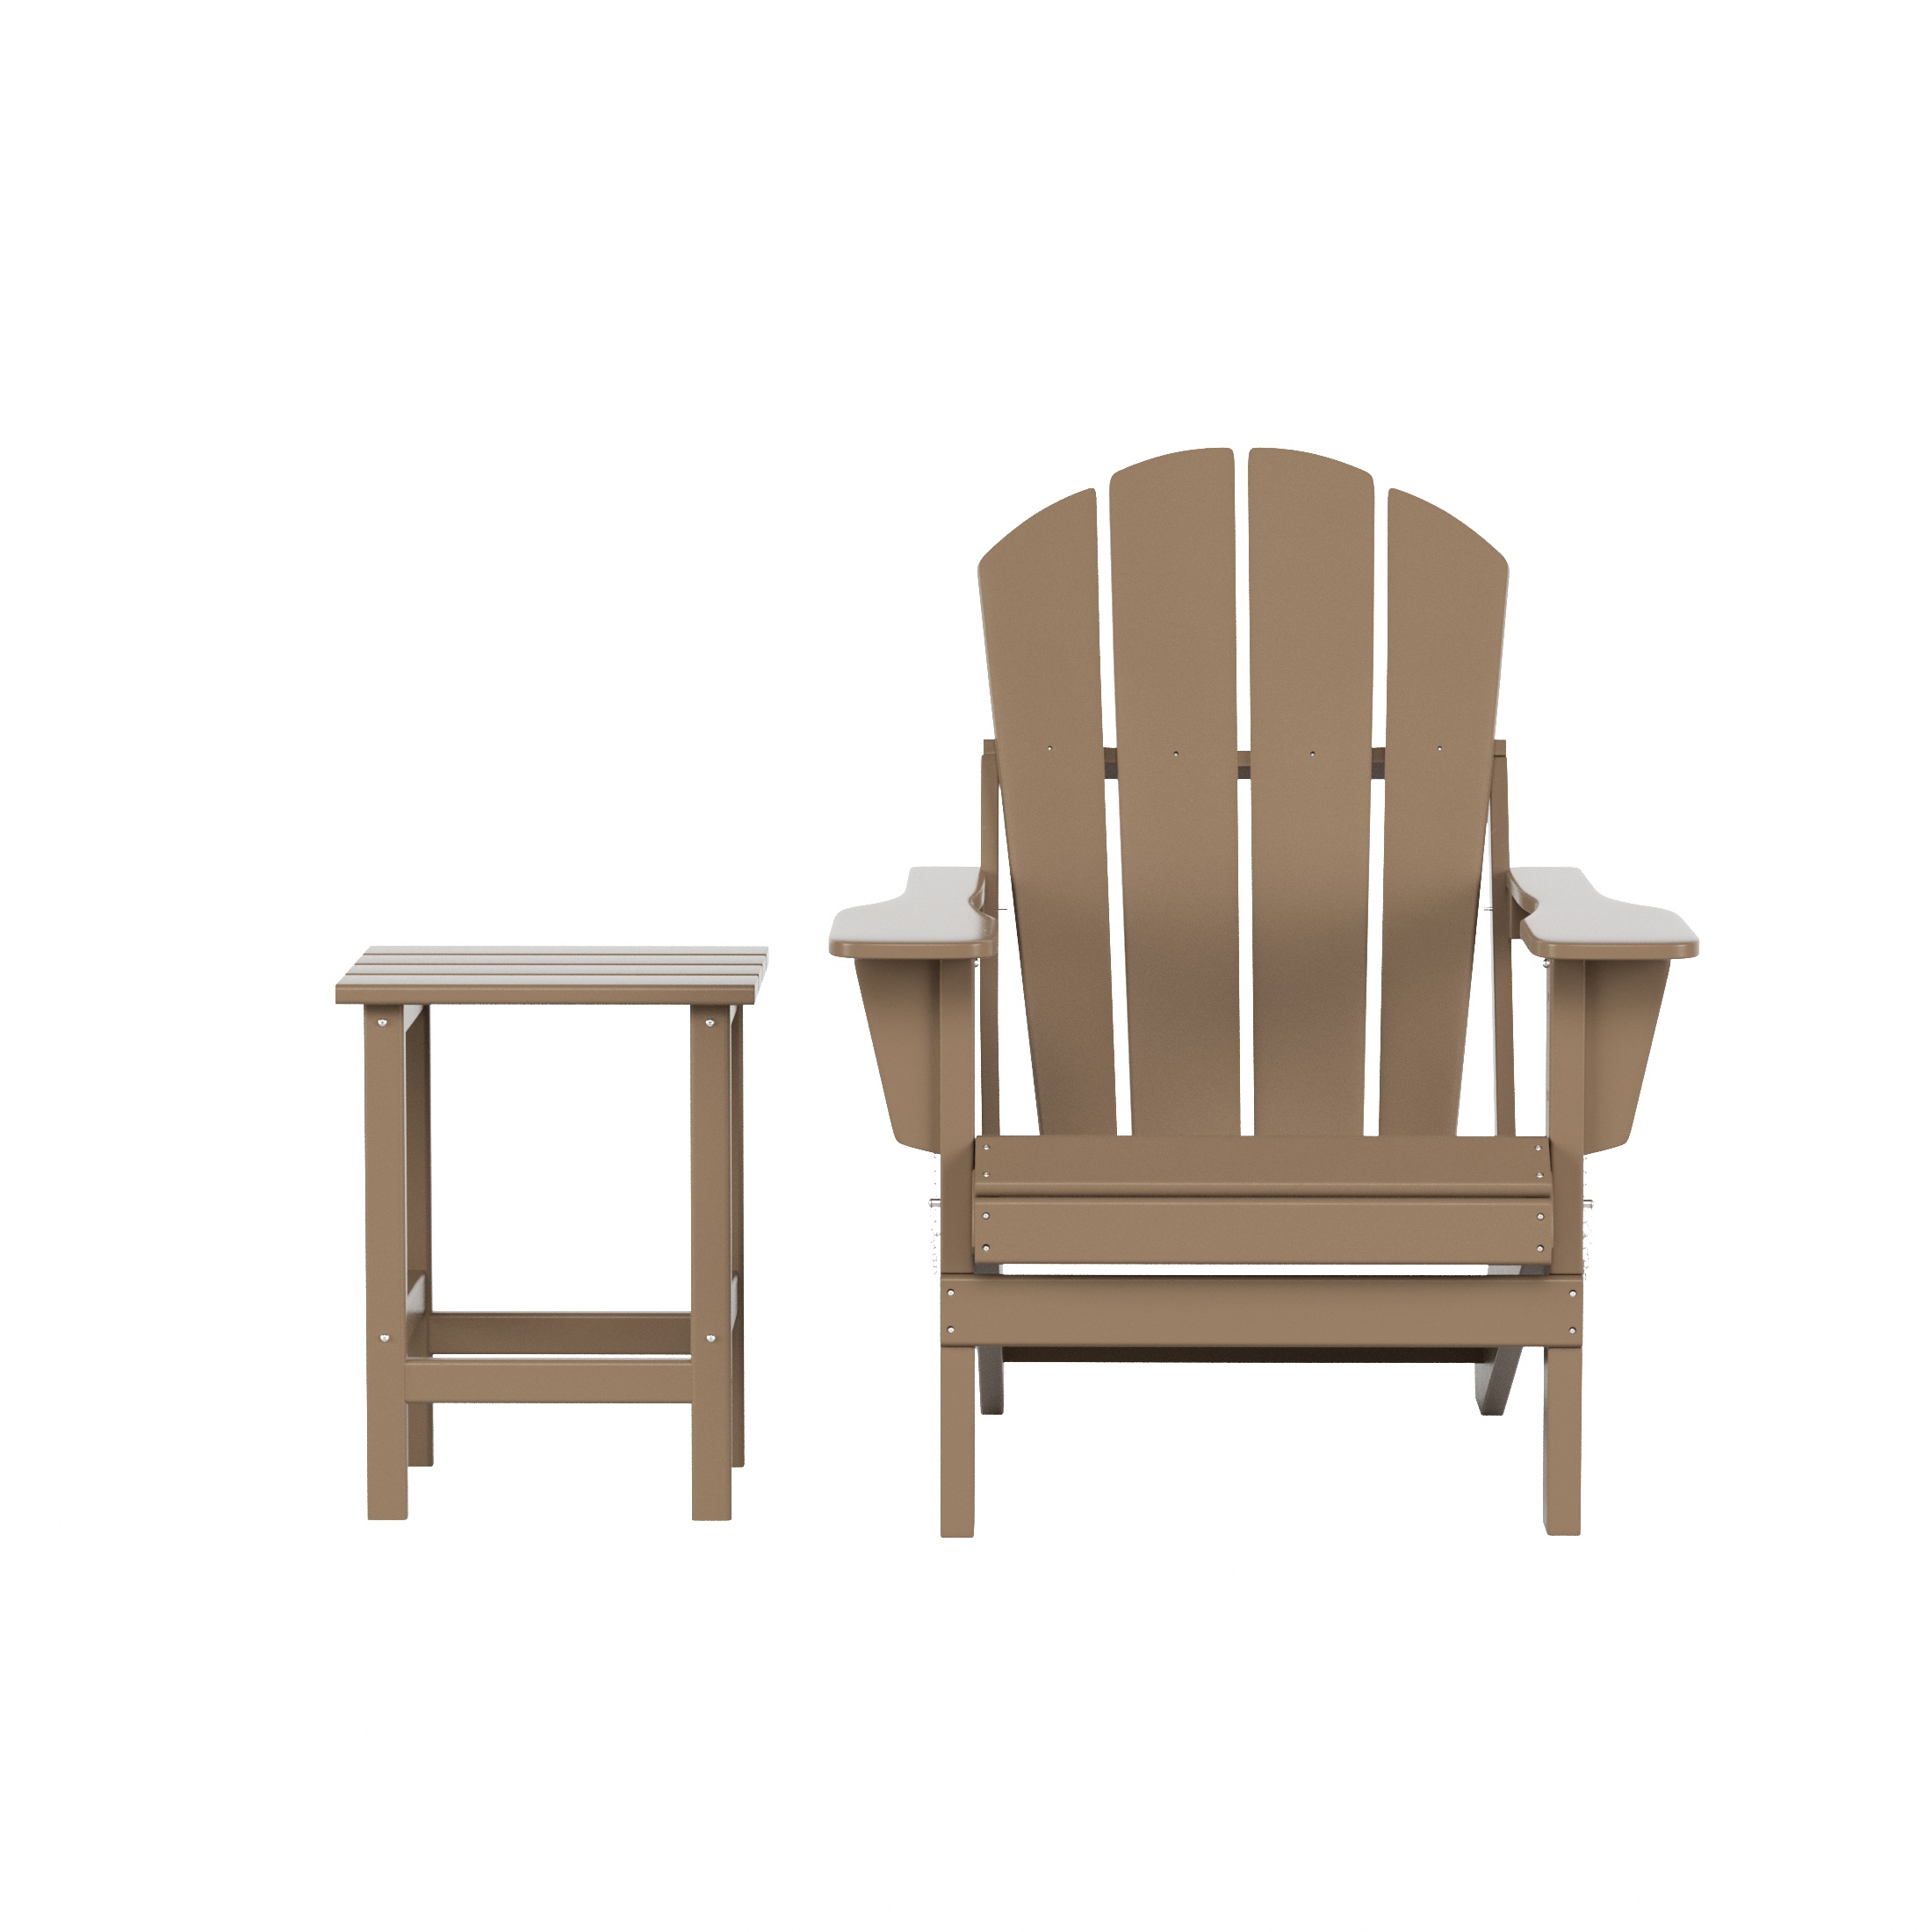 WestinTrends Malibu 2-Pieces Adirondack Chair Set with Side Table, All Weather Outdoor Seating Plastic Patio Lawn Chair Folding for Outside Porch Deck Backyard, Weathered Wood - image 4 of 7